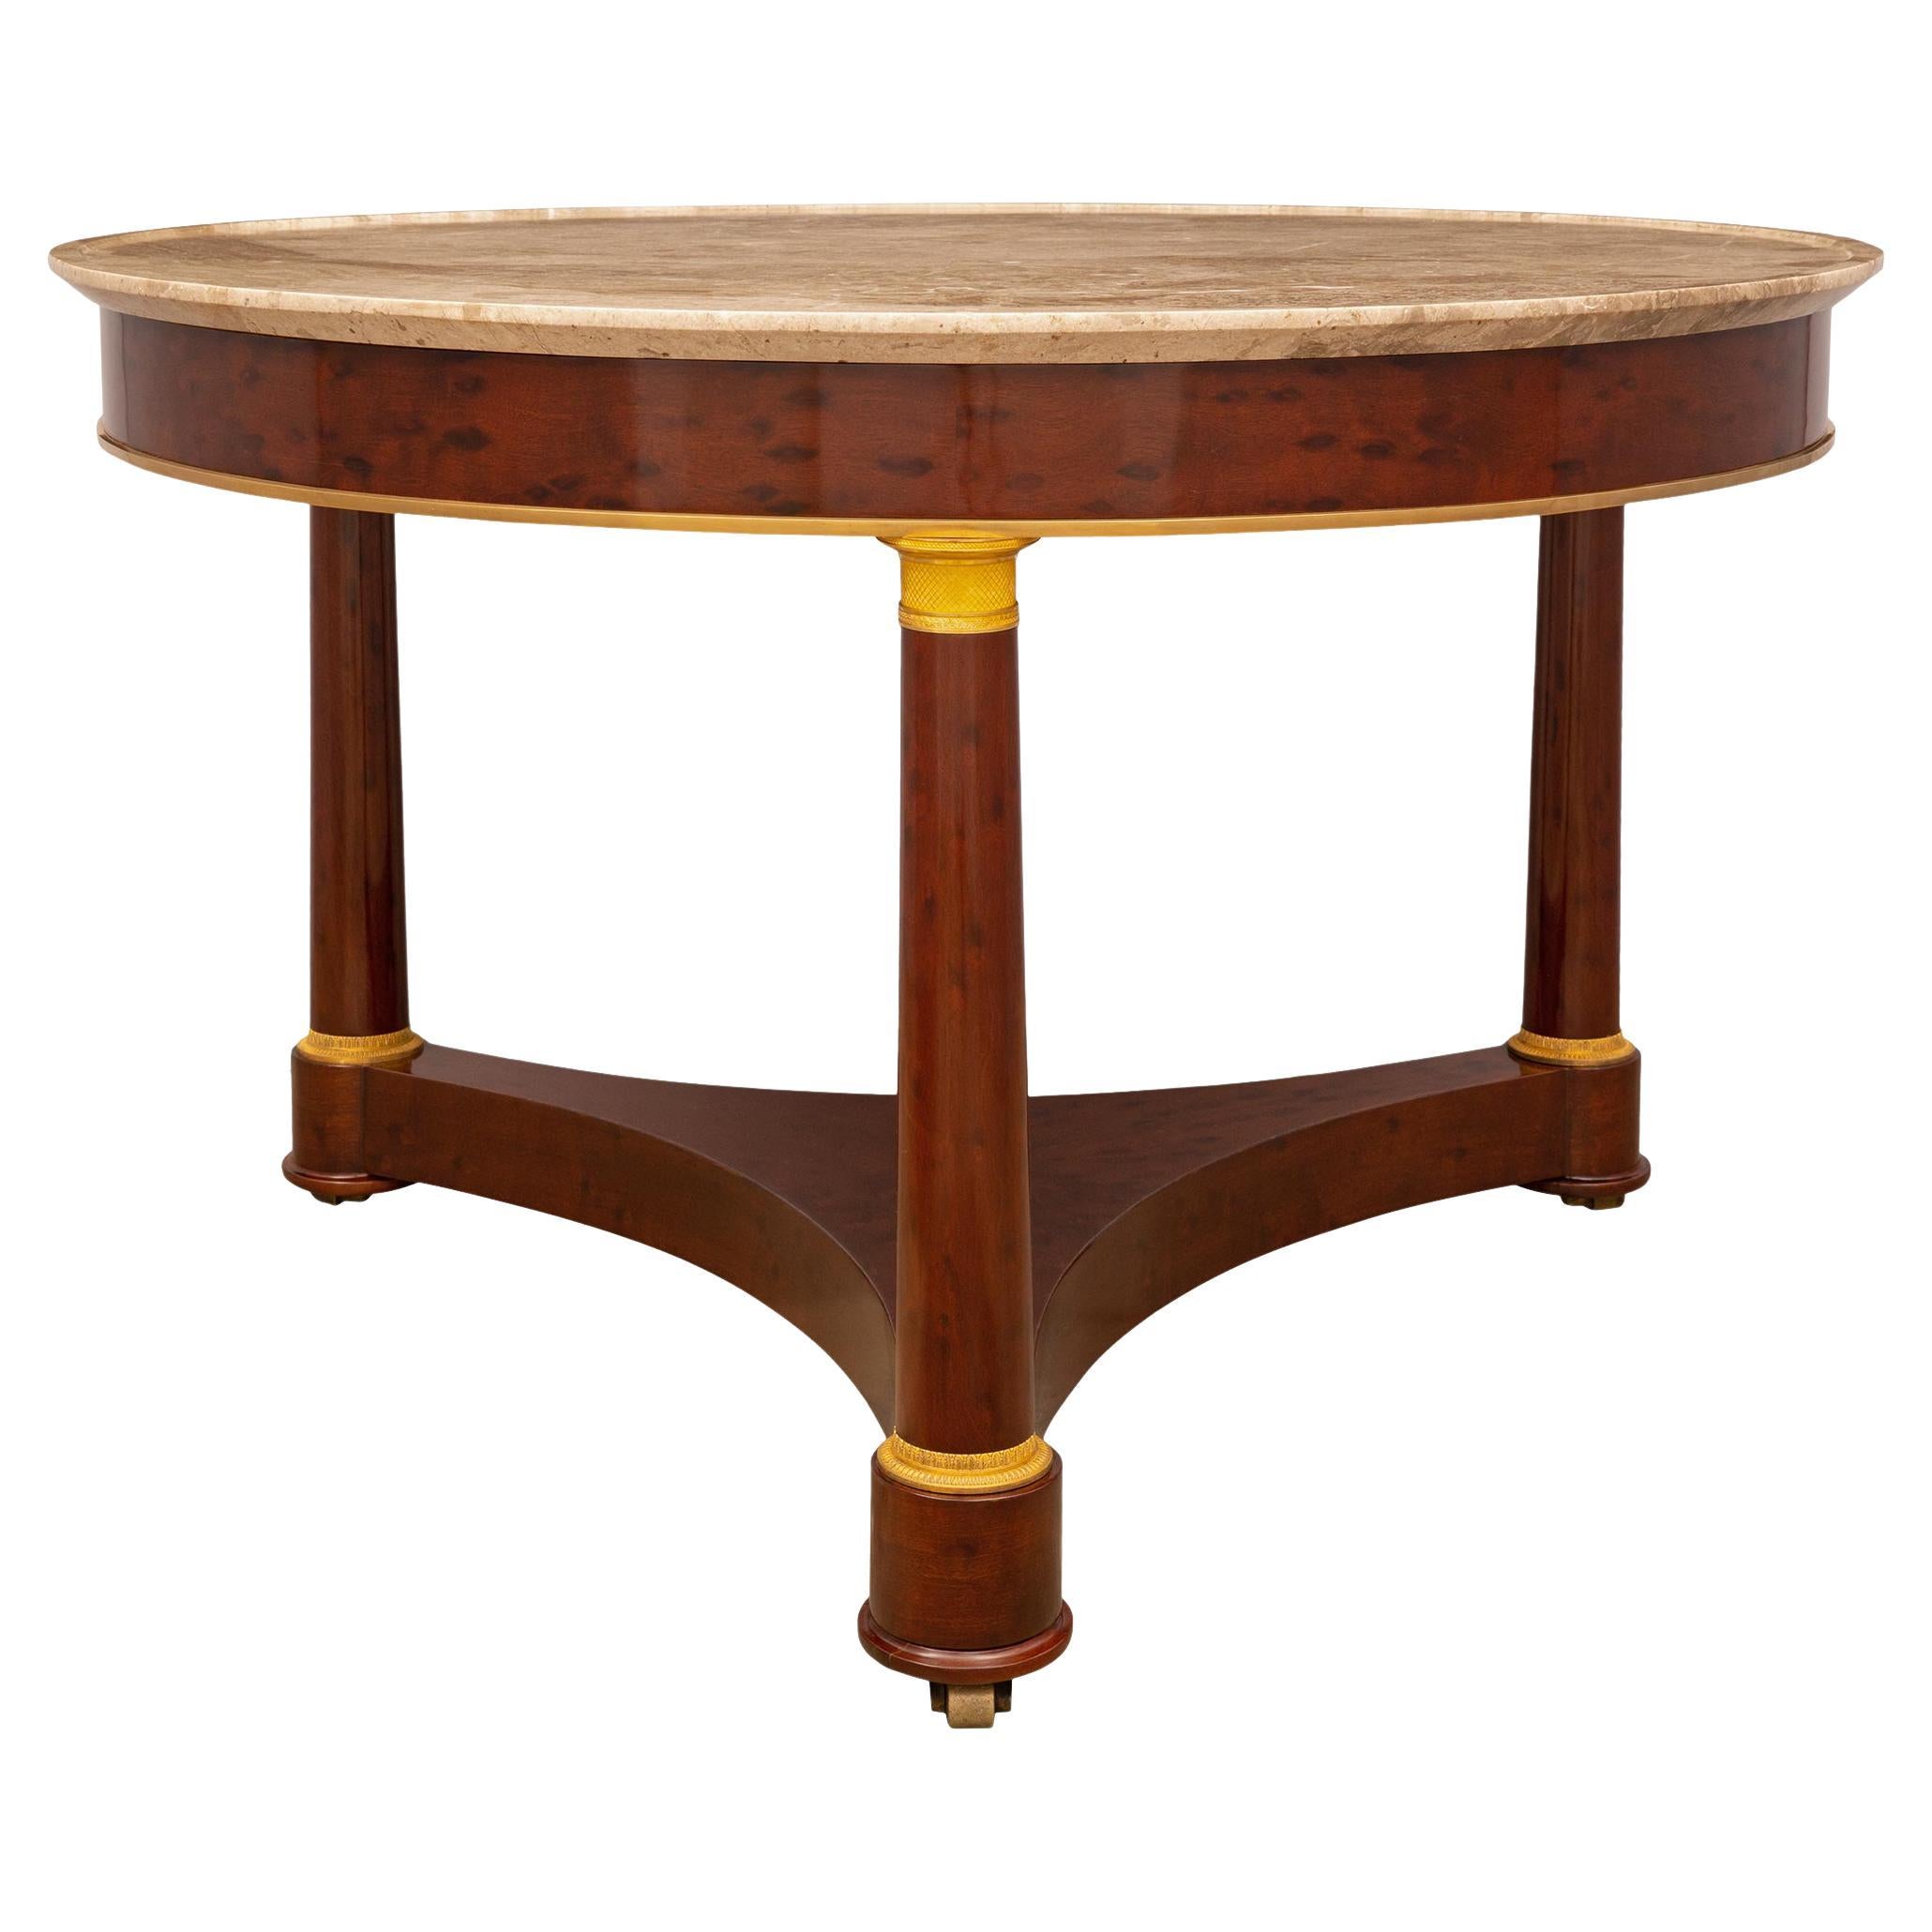 French Early 19th Century Neoclassical St. Center Table